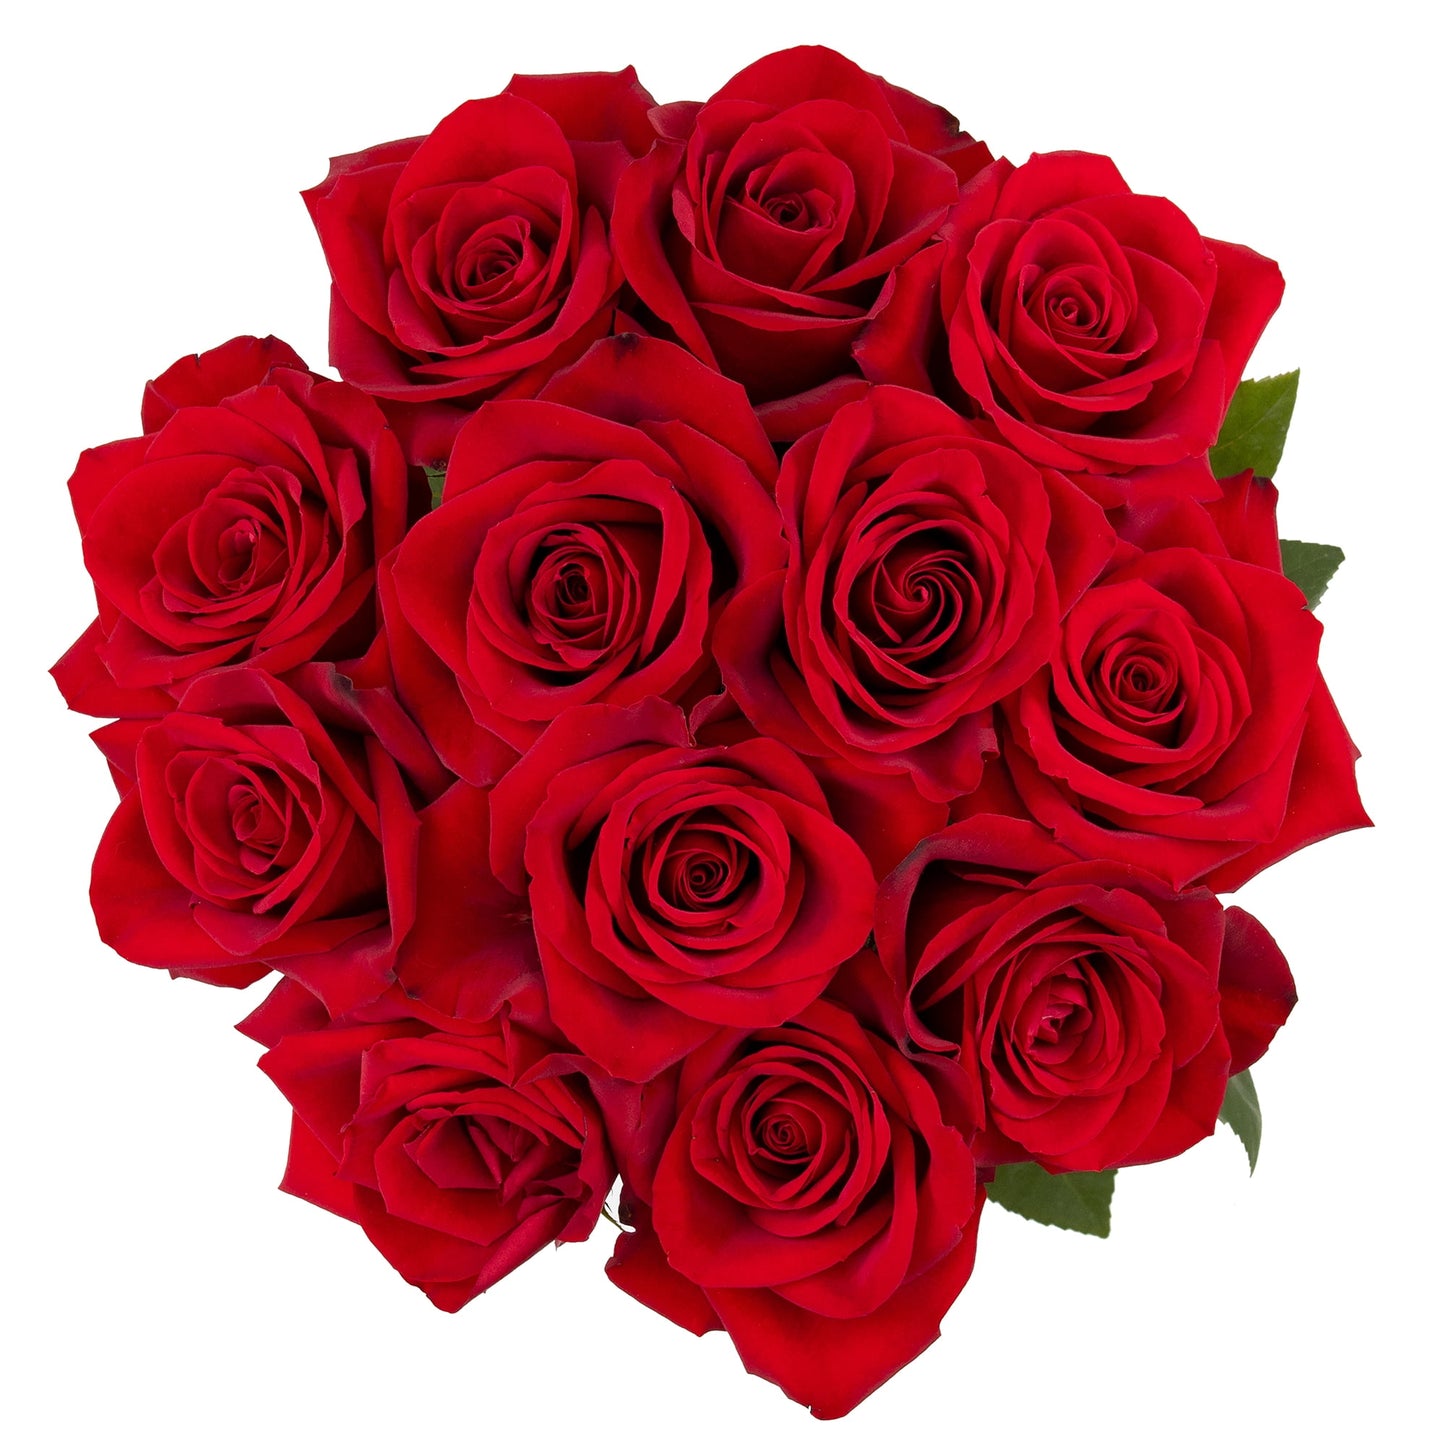 Fresh-Cut Solid Roses Flower Bunch, Minimum of 12 Stems, Colors Vary